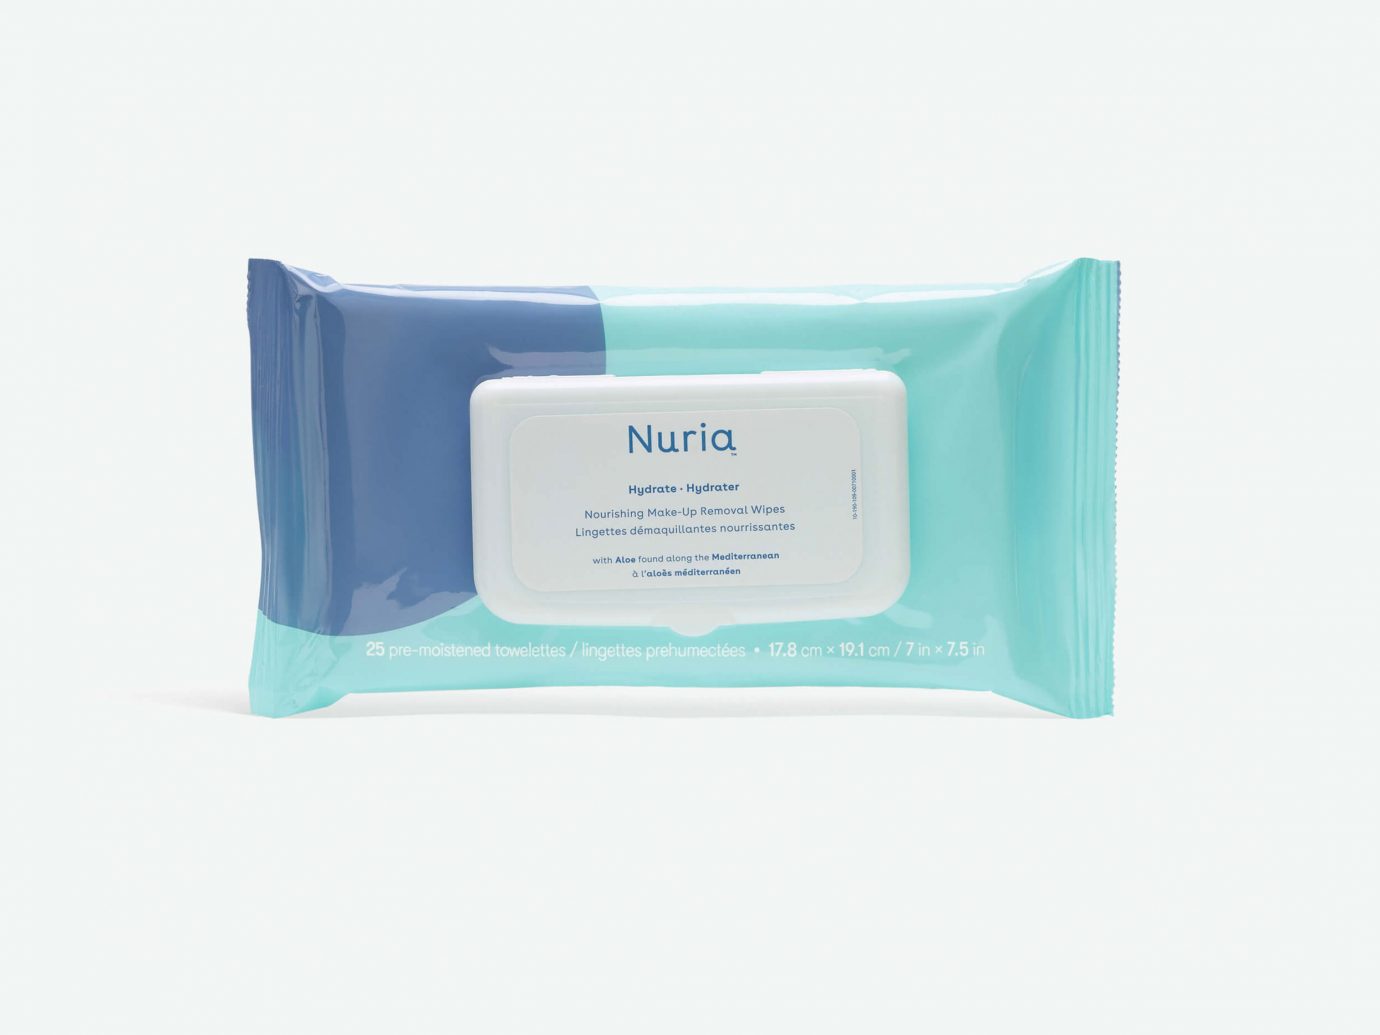 Nuria Hydrate Nourishing Make-Up Removal Wipes